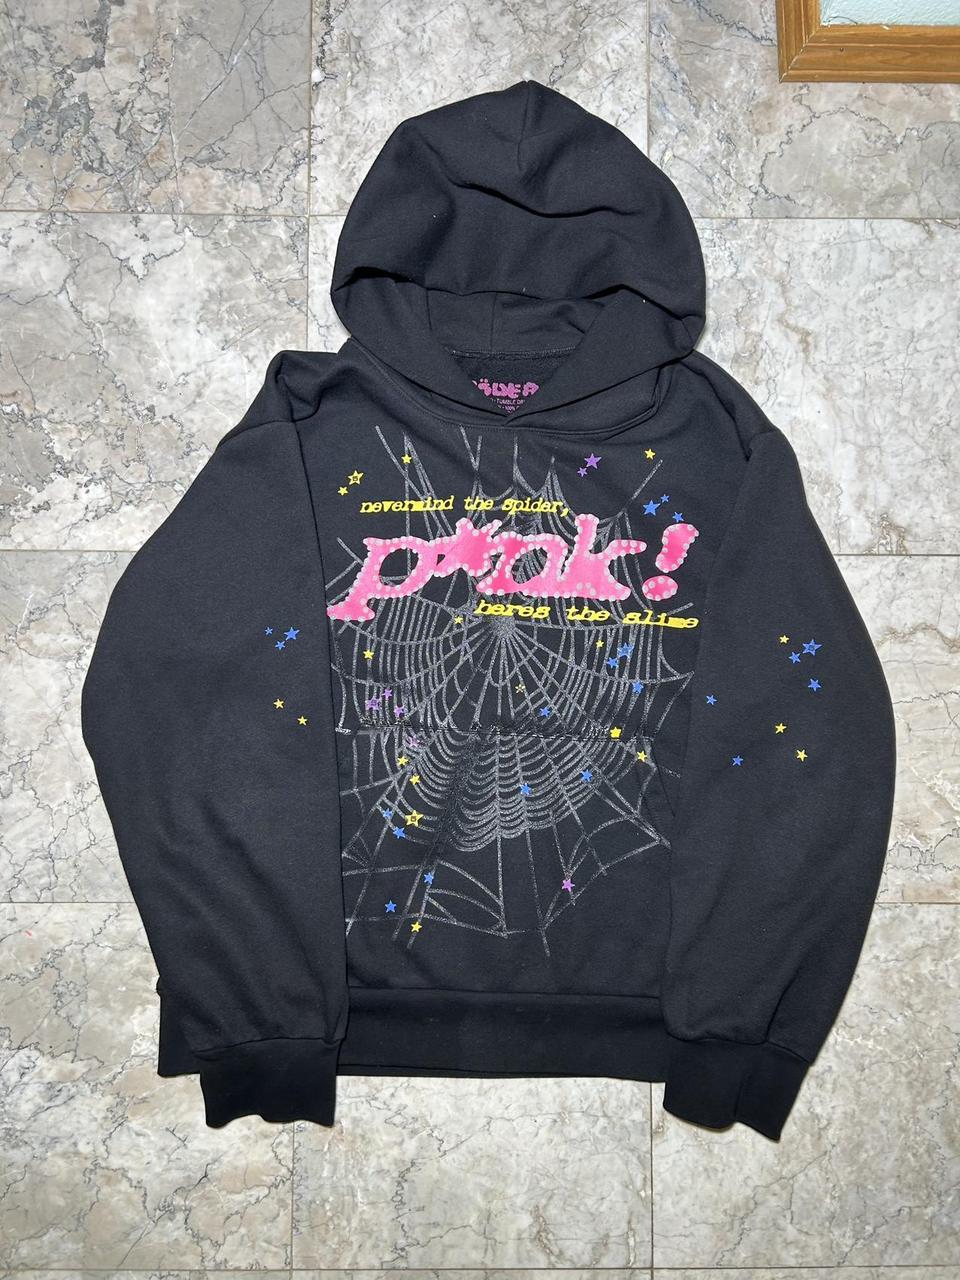 P*nk! Hoodie (questionably authentic) size medium.... - Depop